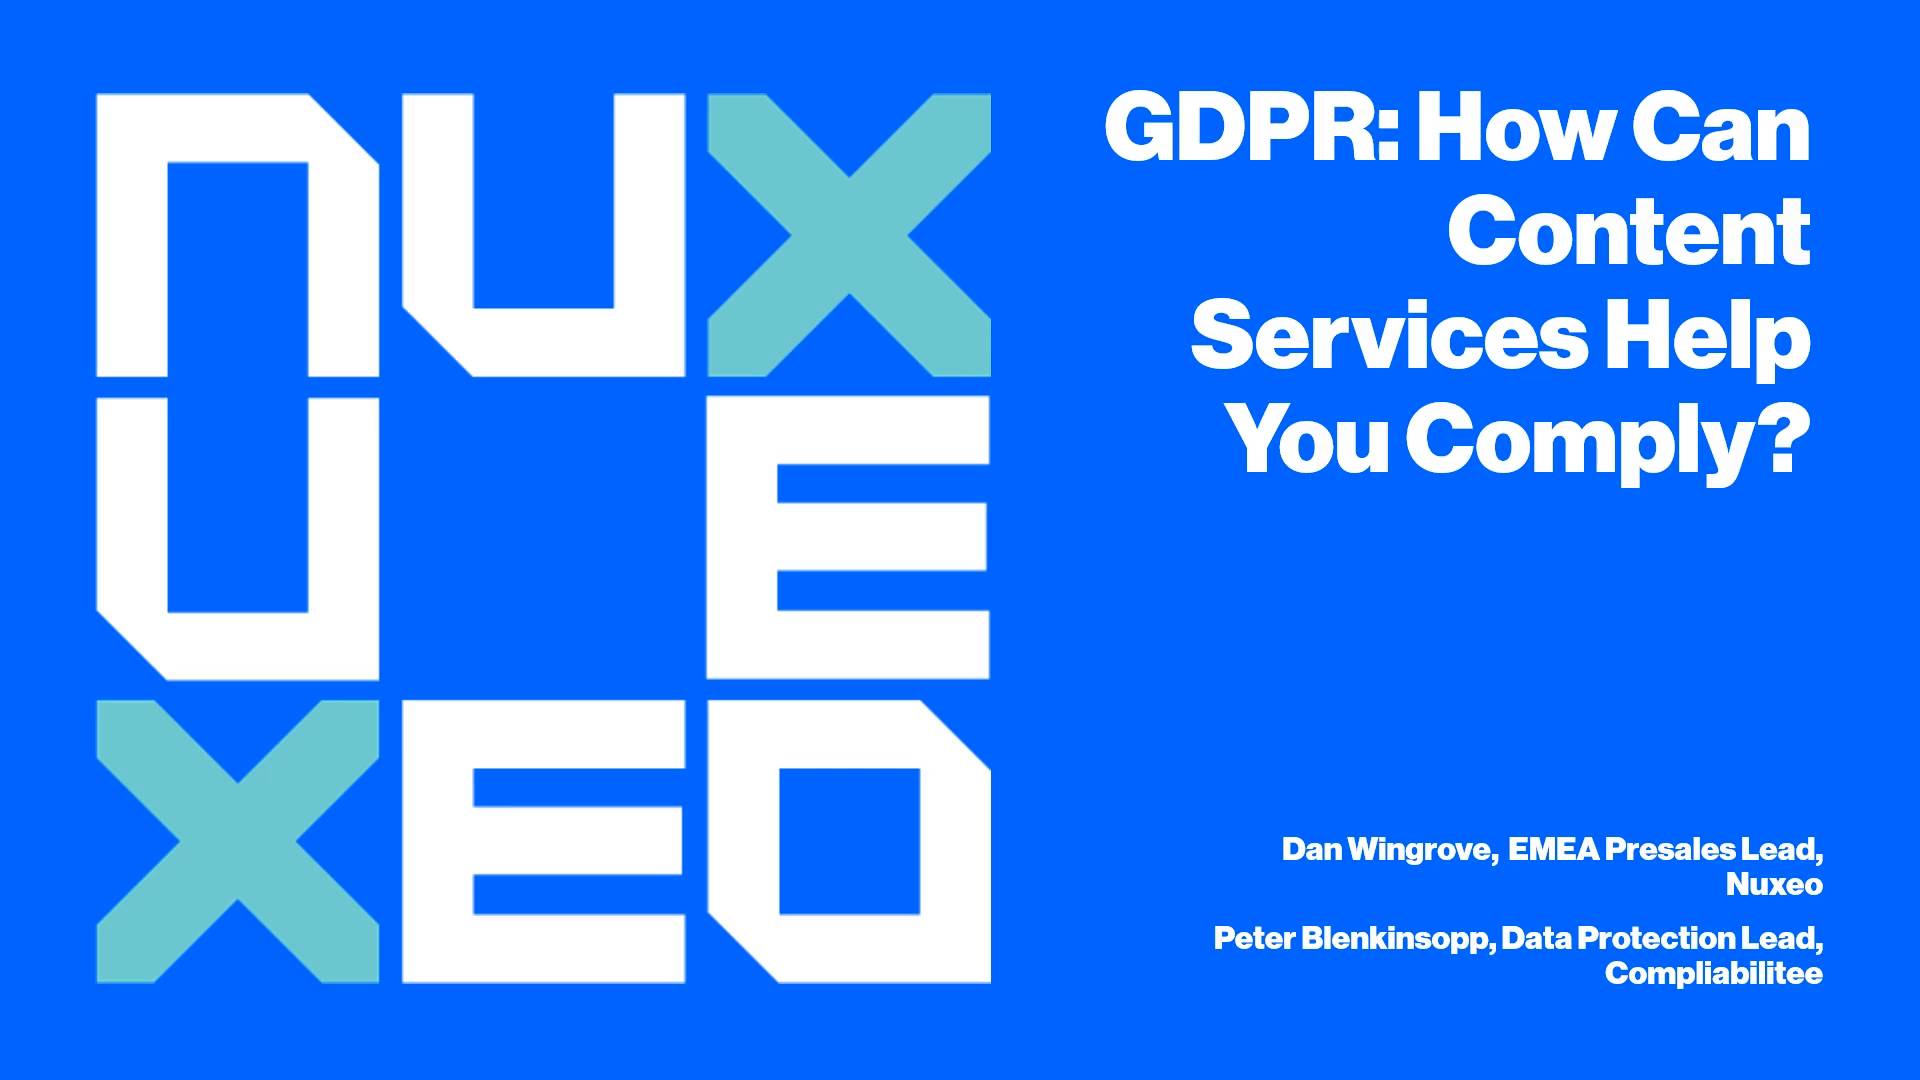 How can Nuxeo help with GDPR compliance